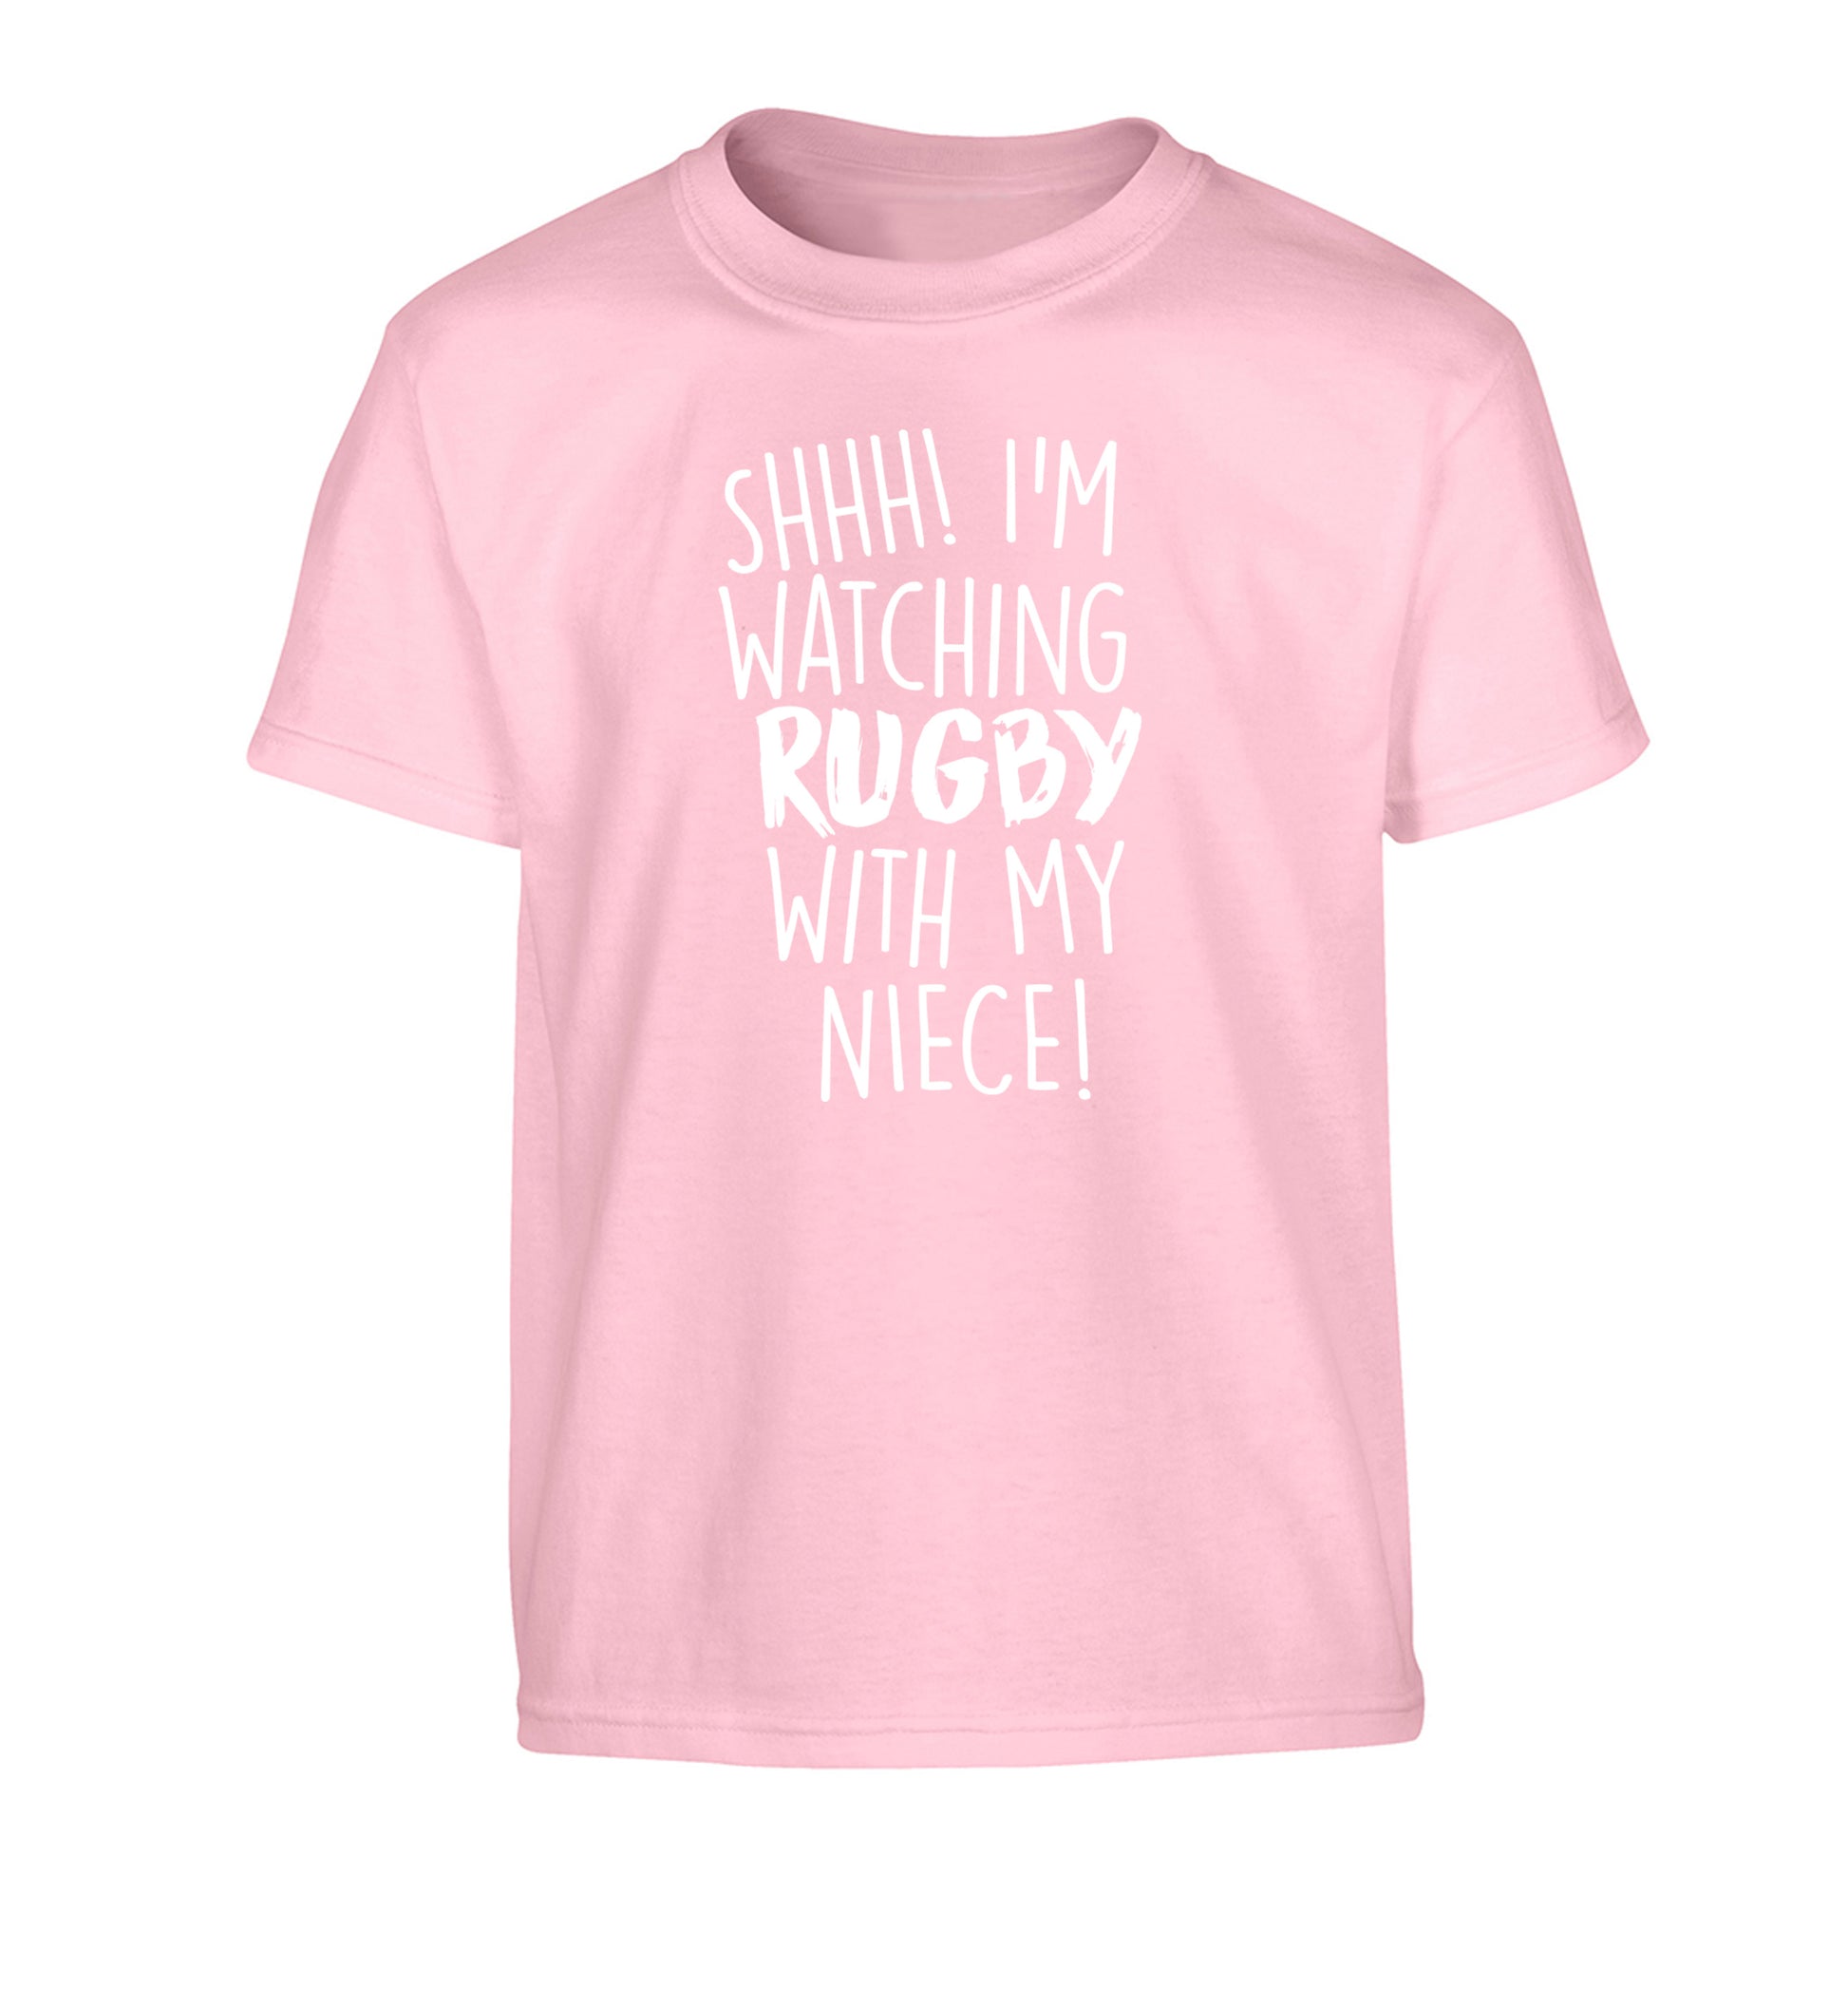 Shh.. I'm watching rugby with my niece Children's light pink Tshirt 12-13 Years